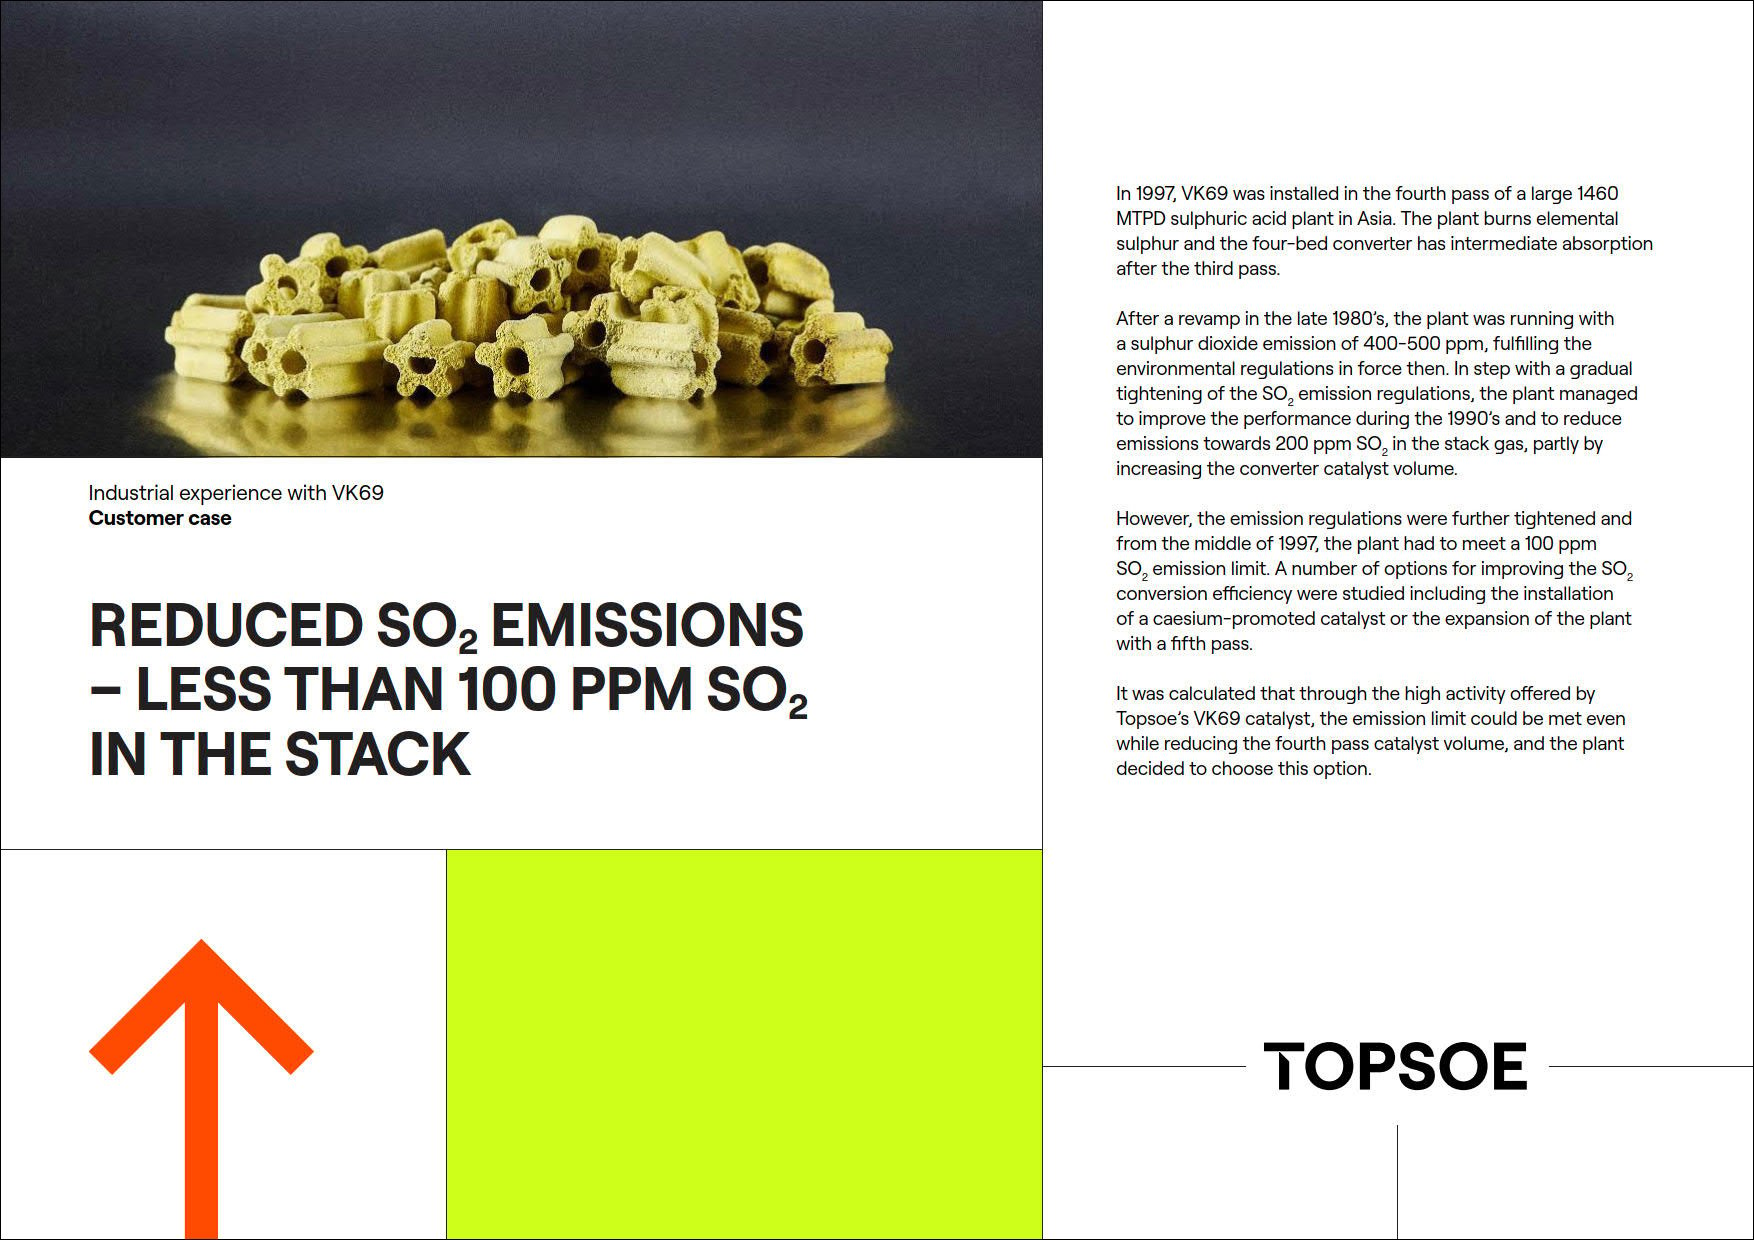 Reduce SO2 emissions - Less than 100 PPM SO2 in the stack